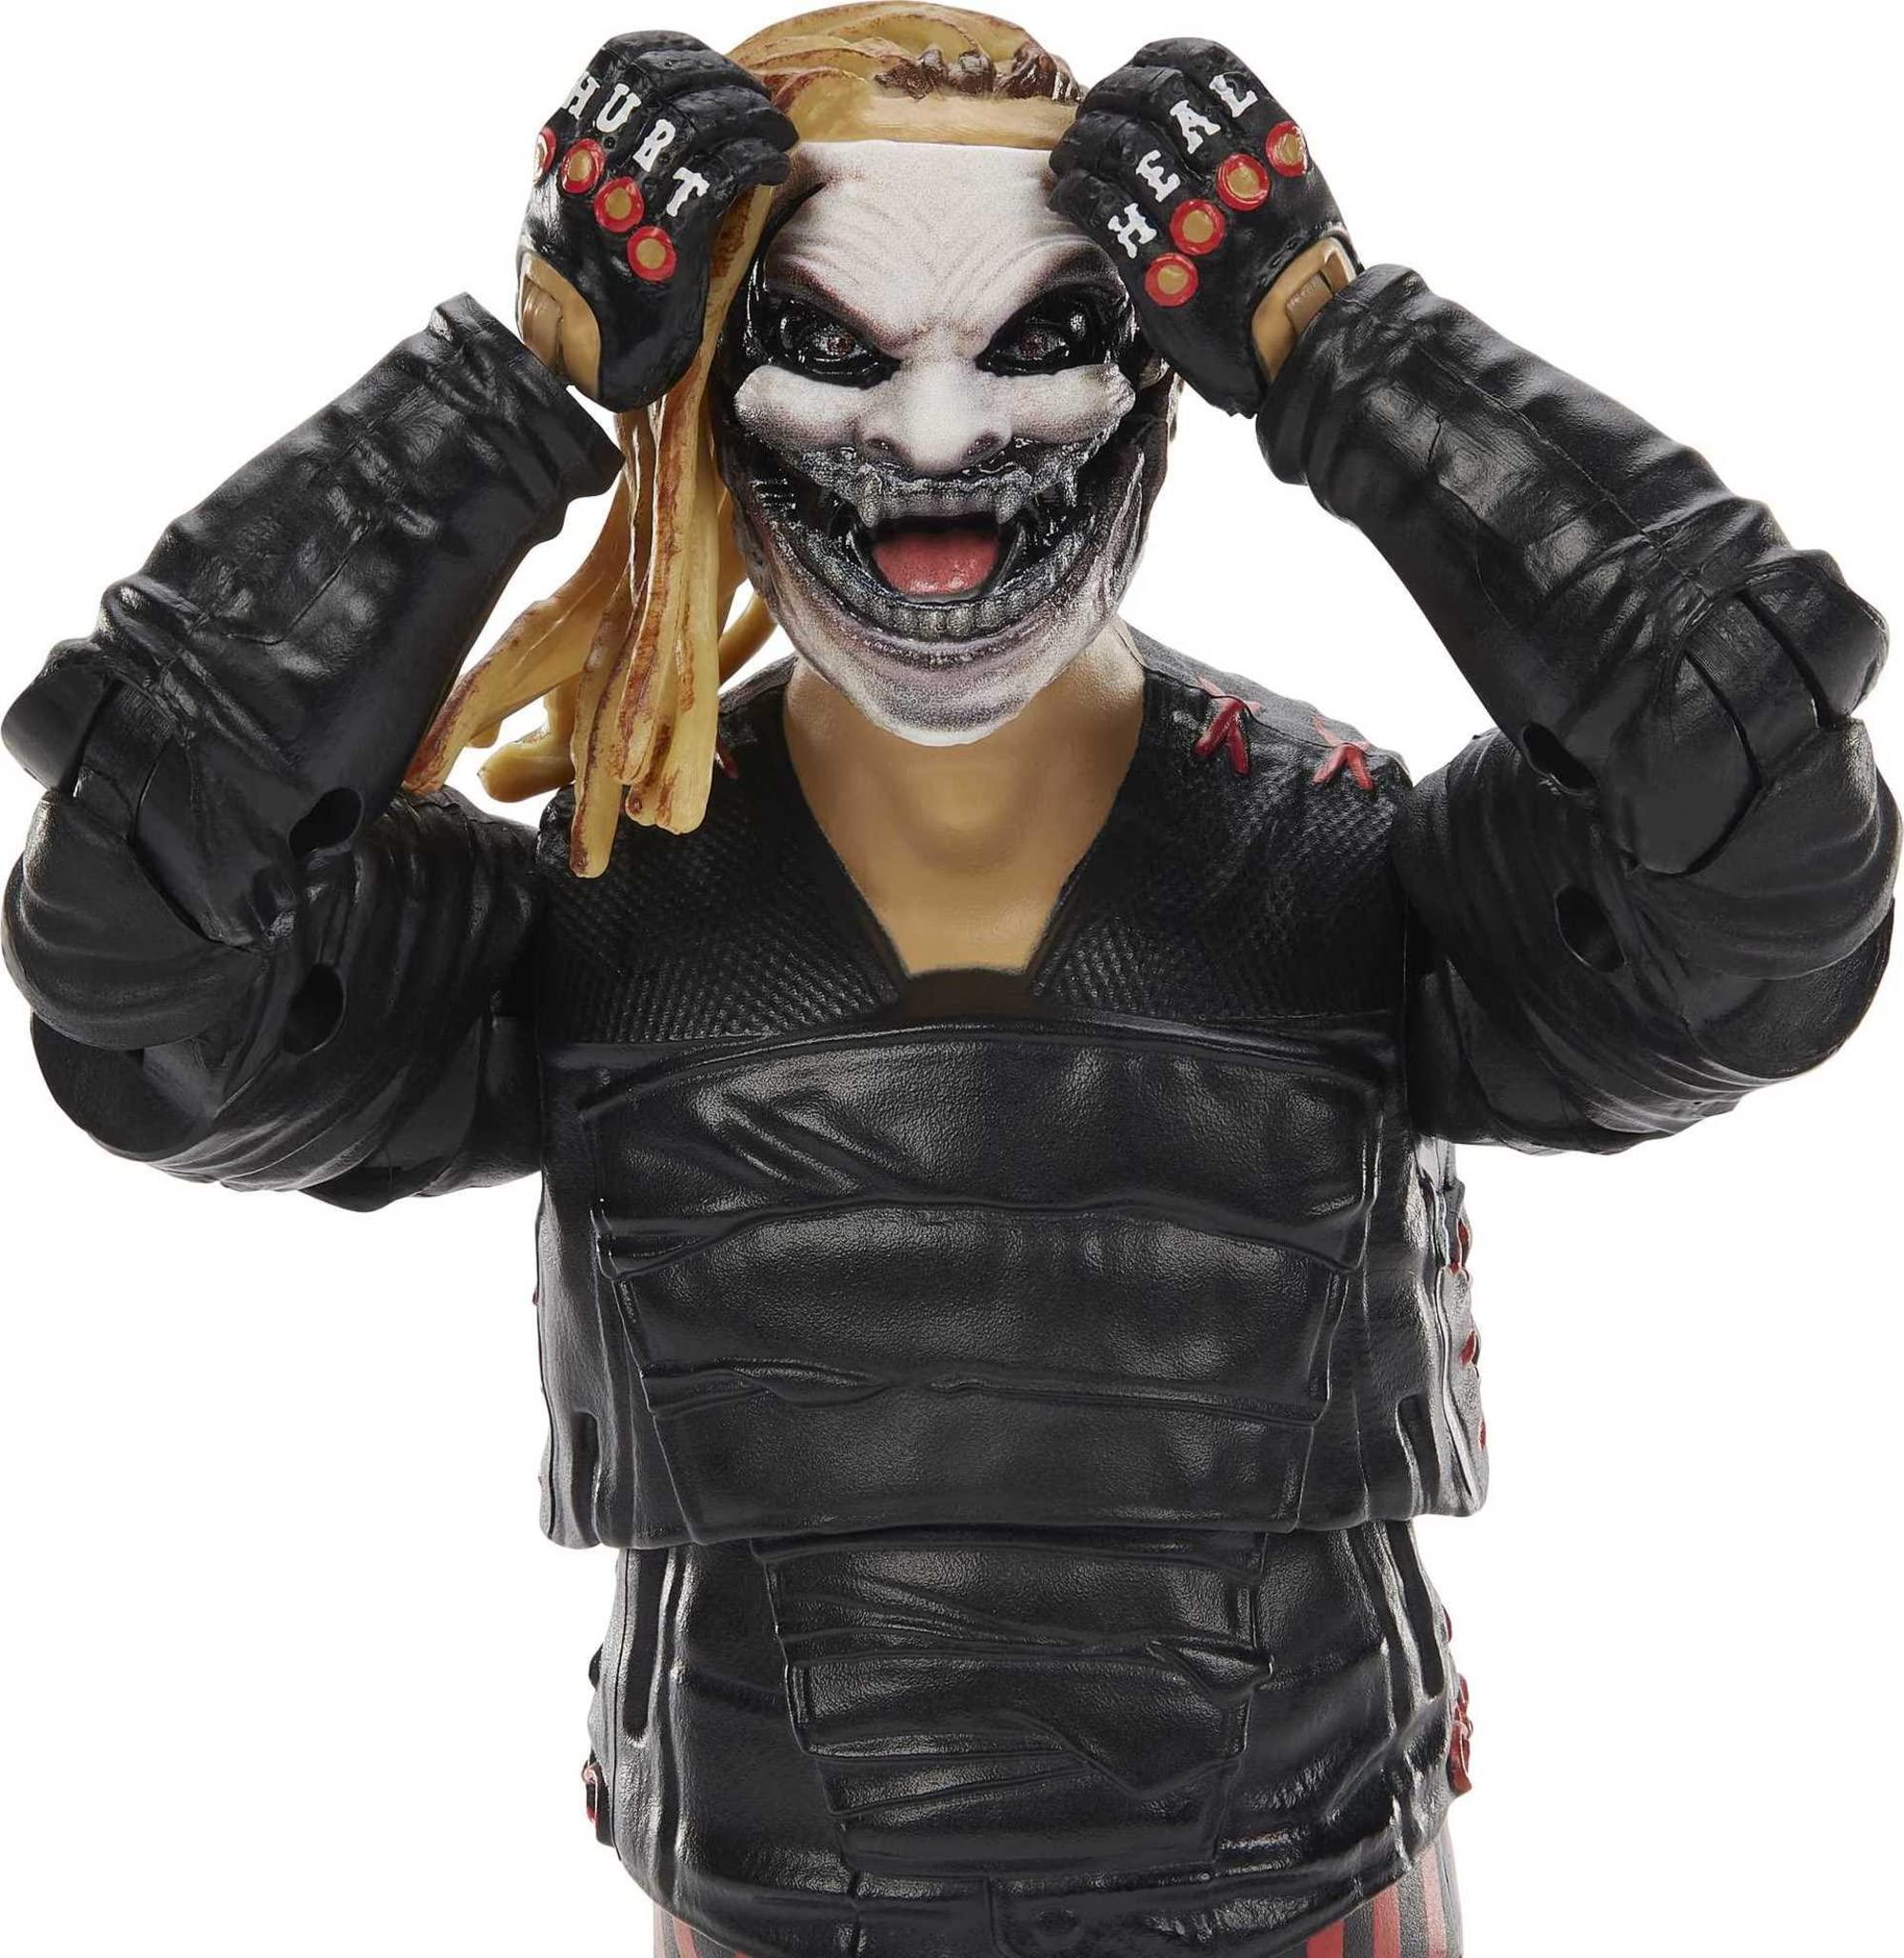 mattel wwe "the fiend" bray wyatt ultimate edition action figure, 6-inch collectible with interchangeable entrance gear, extr